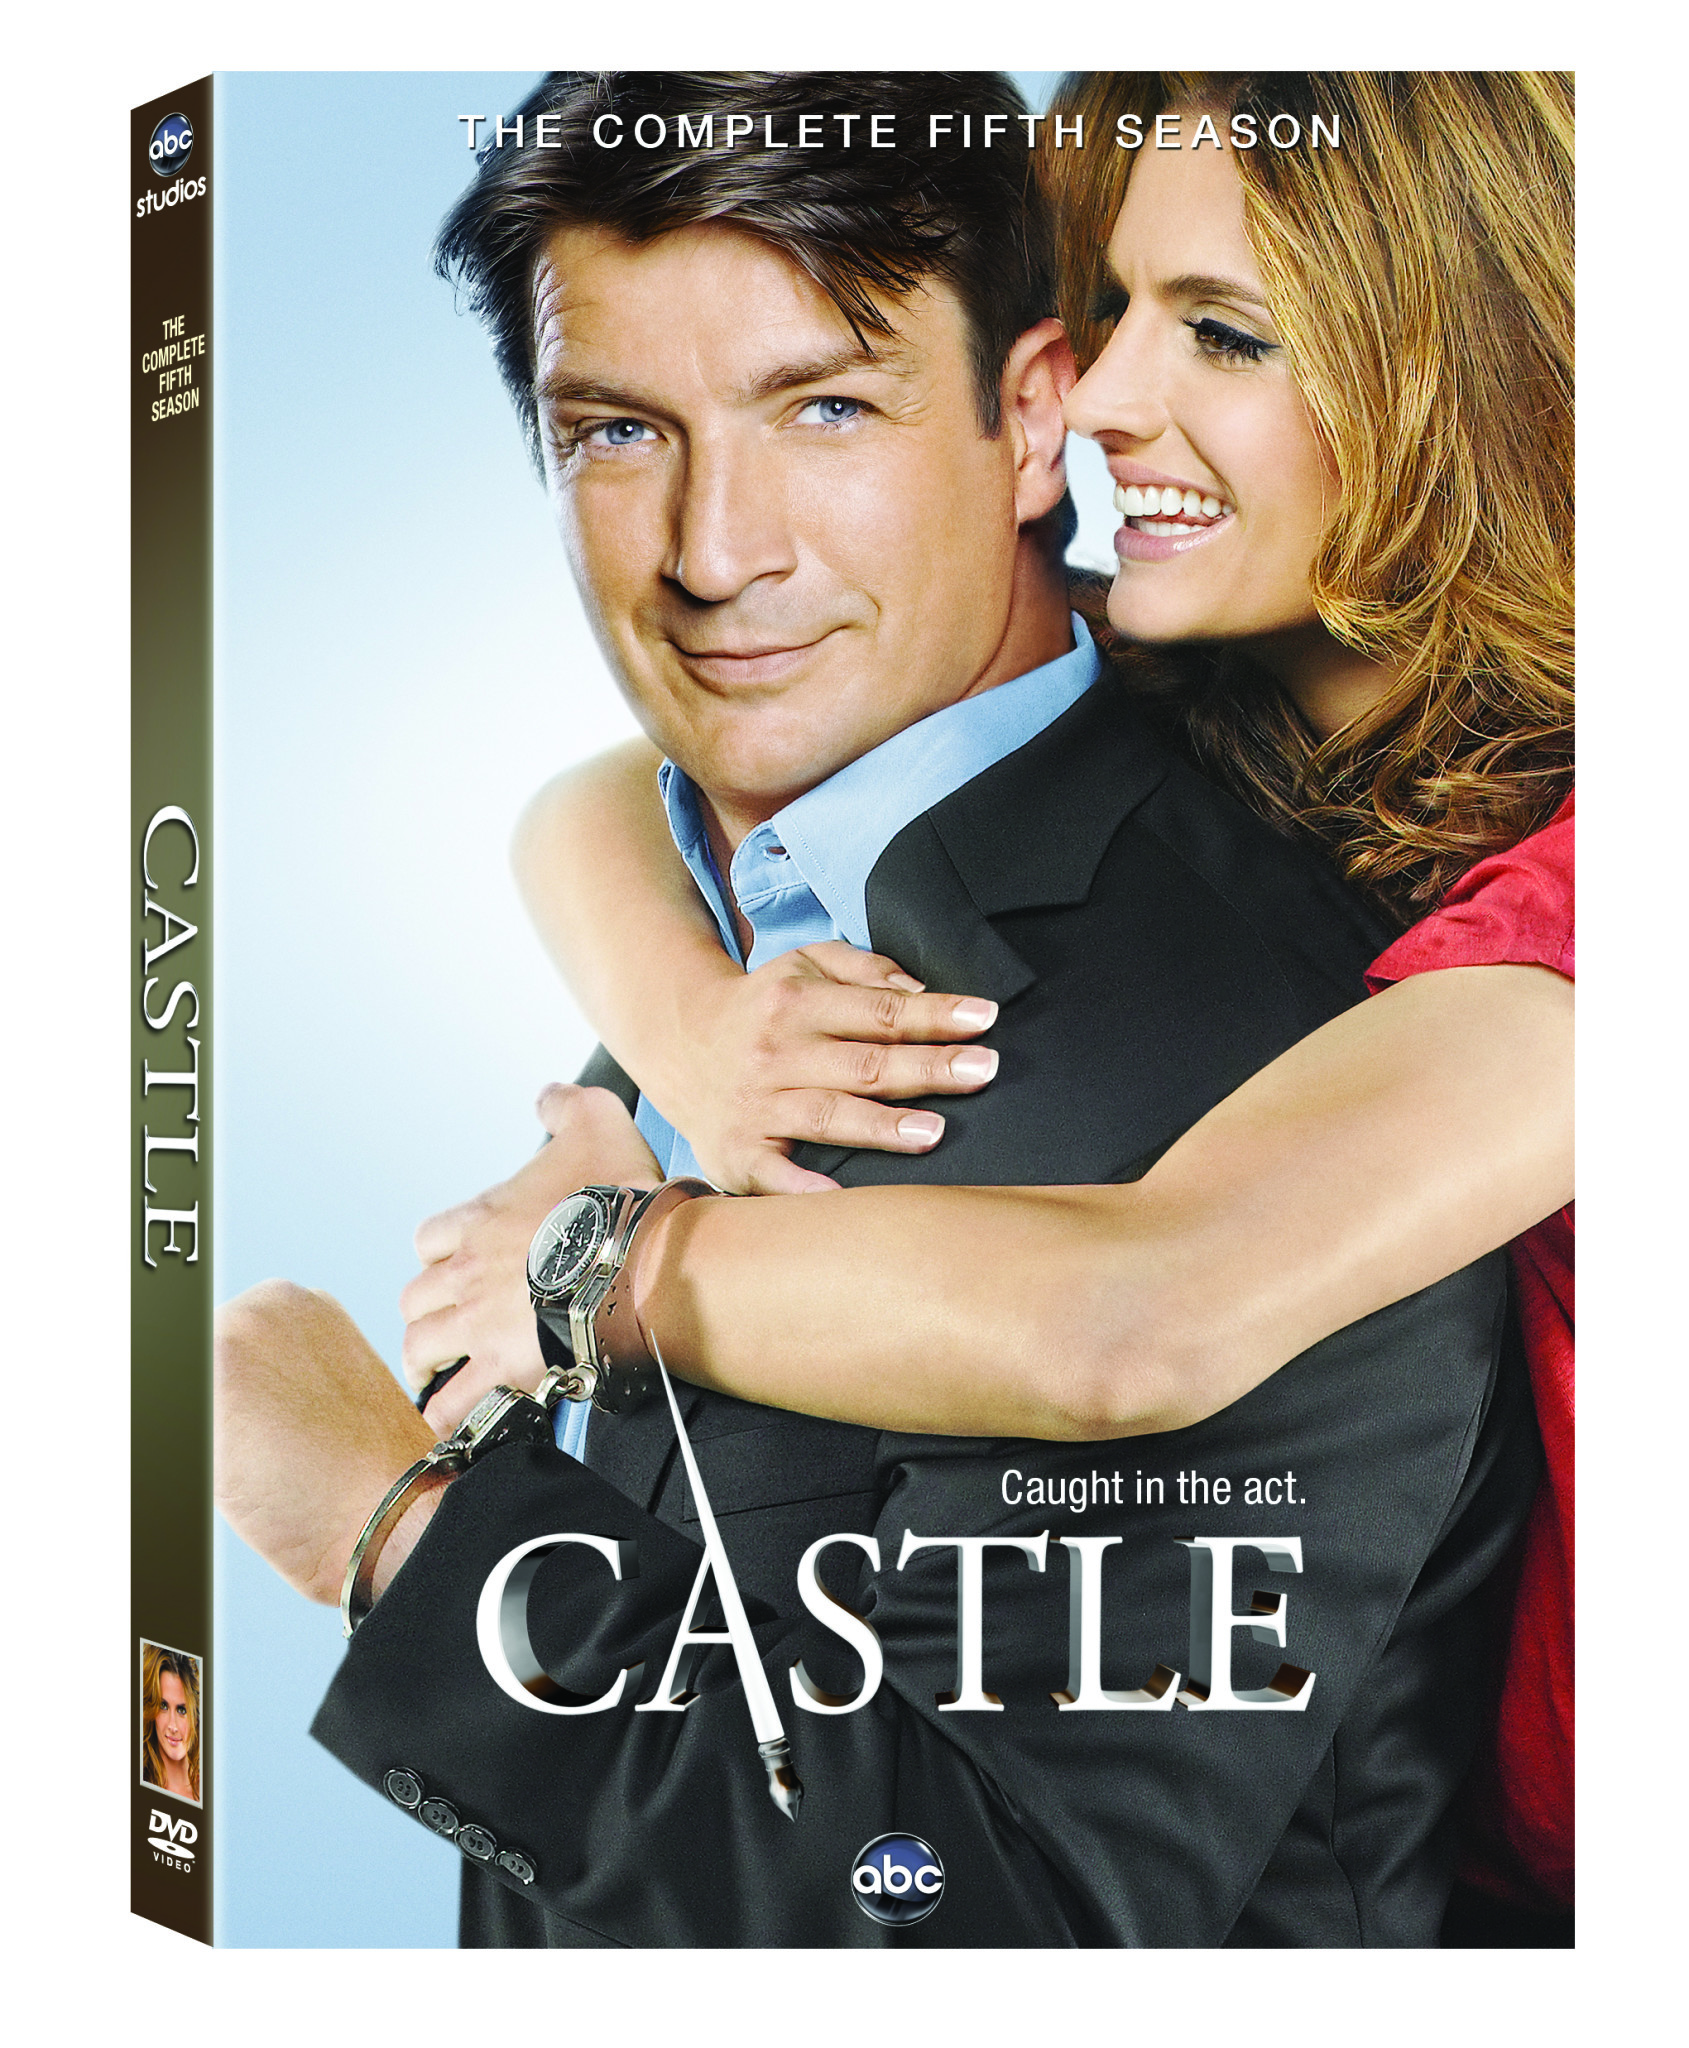 ‘Castle: The Complete Fifth Season’ Comes to DVD September 10, 2013